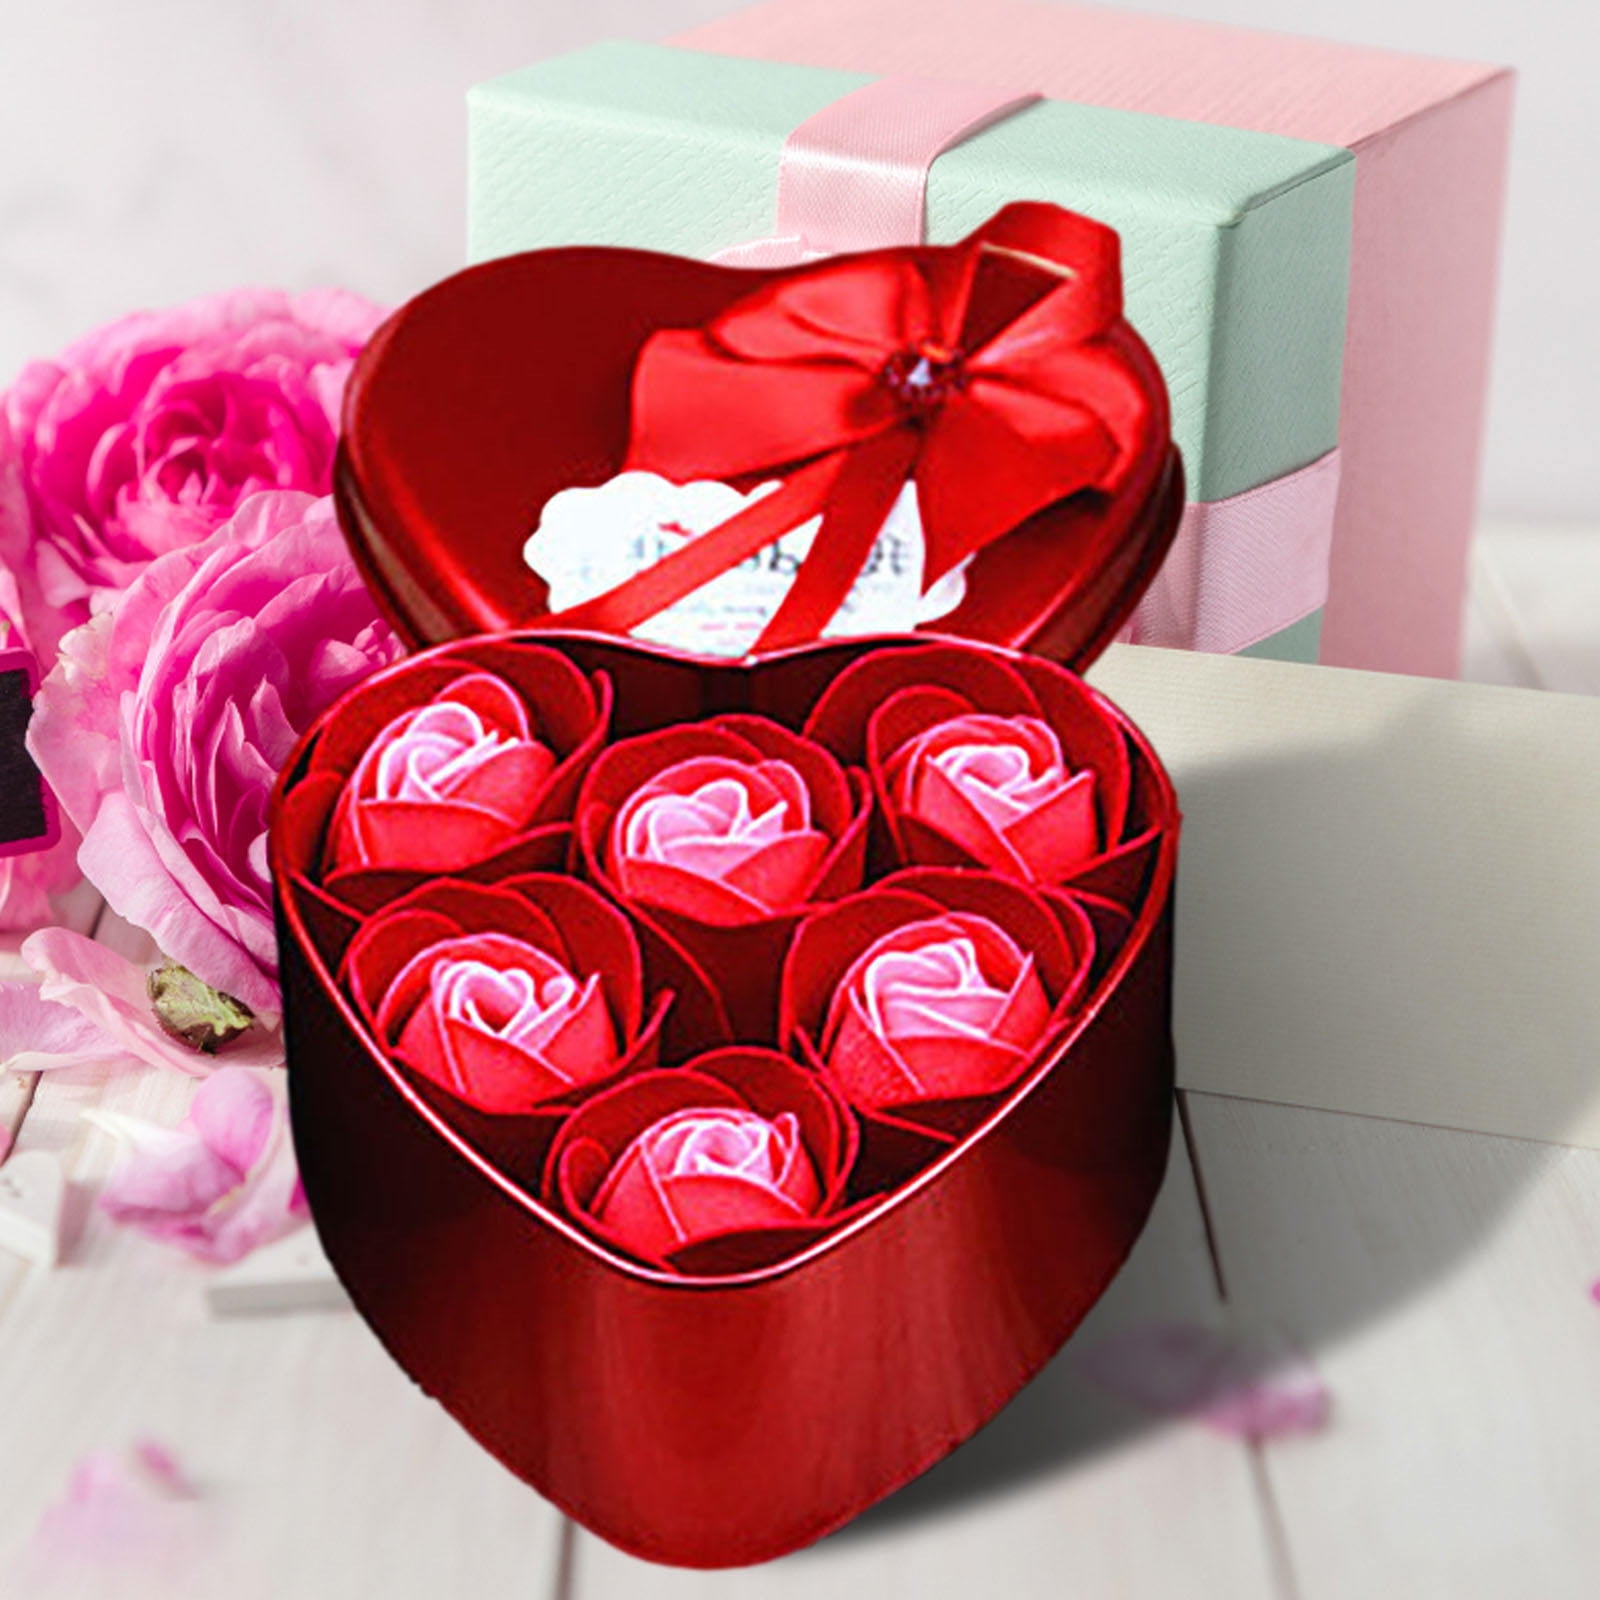 Homemade Valentine's Day gifts for her - 9 Ideas for your special girl